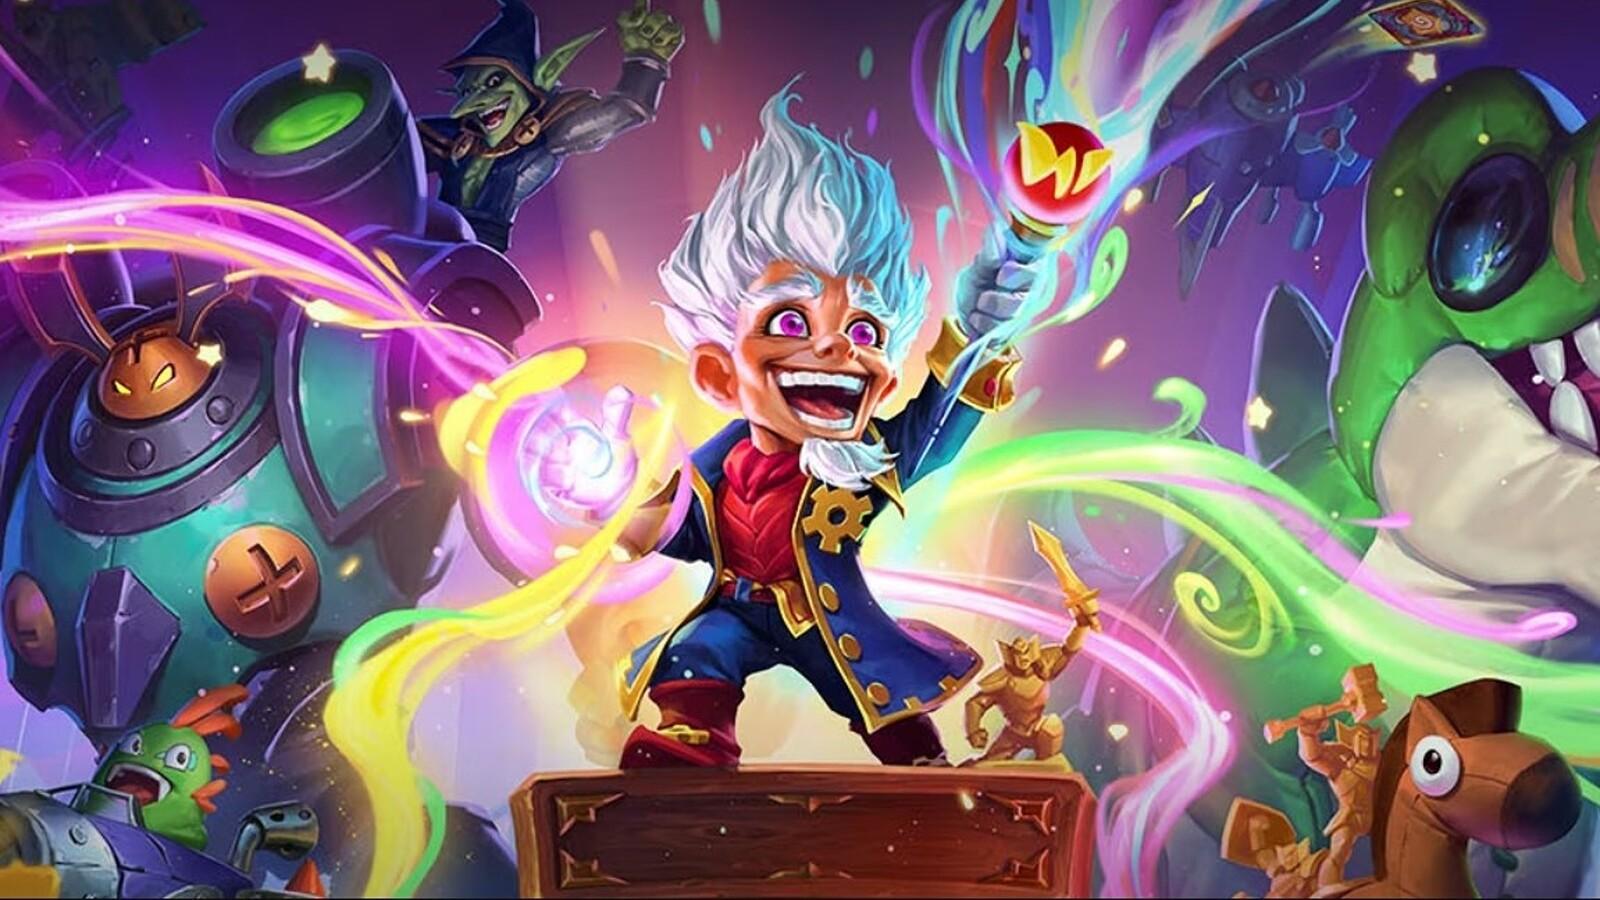 Whizbang's Workshop Confirmation art featuring the character and a bright colorful background filled with his creations